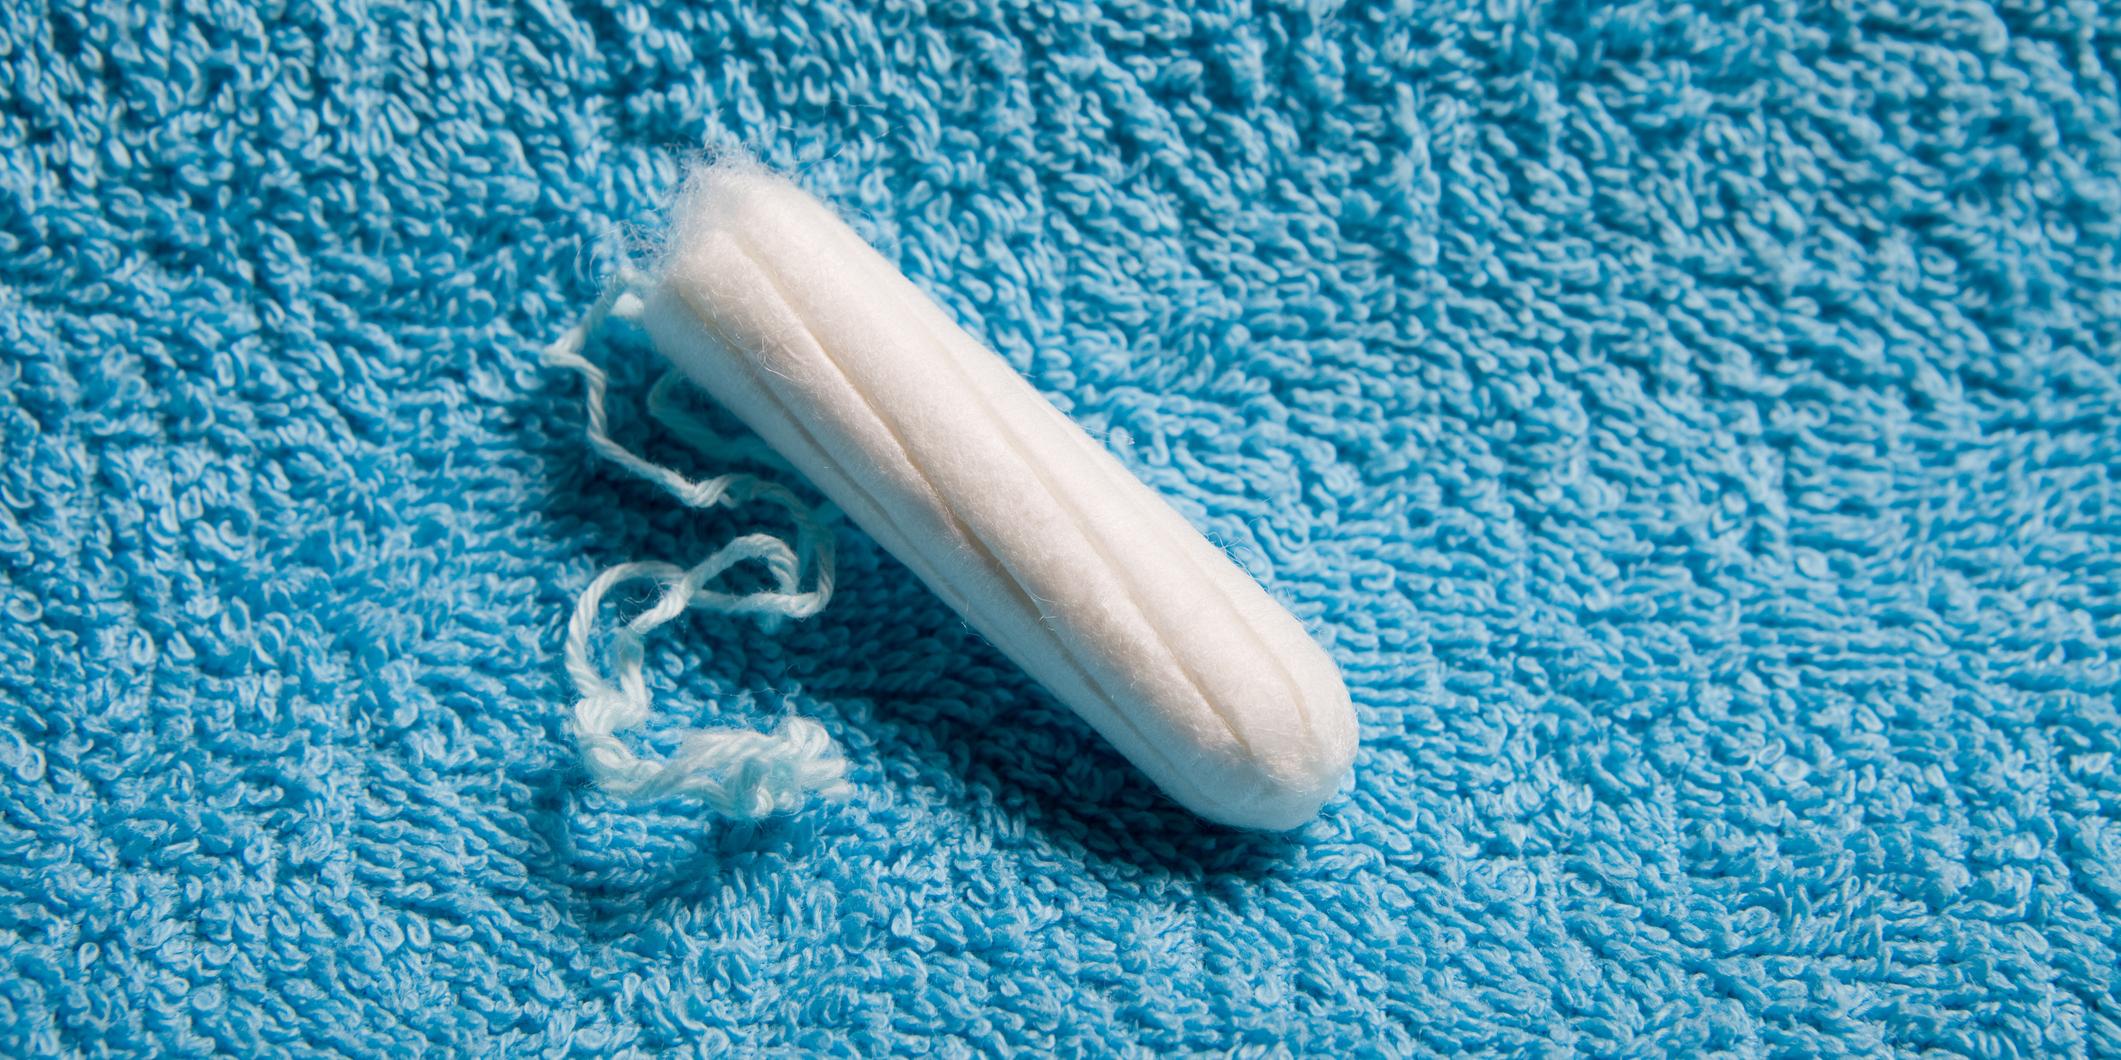 Chancellor Rishi Sunak promised to axe the so-called tampon tax in March 2020’s budget – with VAT on sanitary products now cut to zero